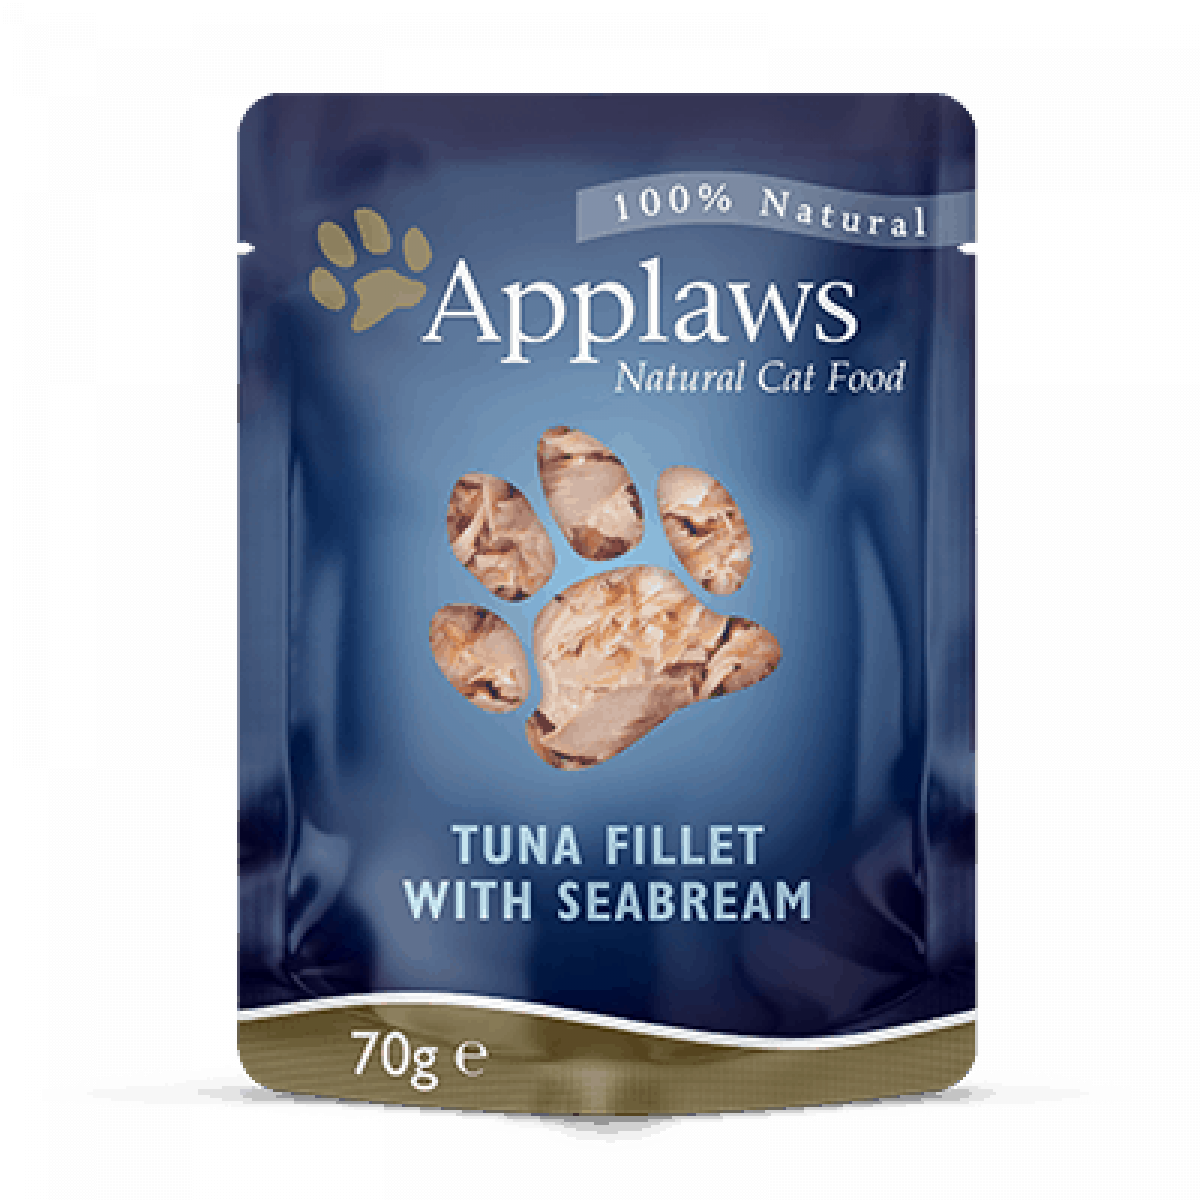 Applaws Tuna with Seabream 70g – Pawfect Supplies Ltd Product Image